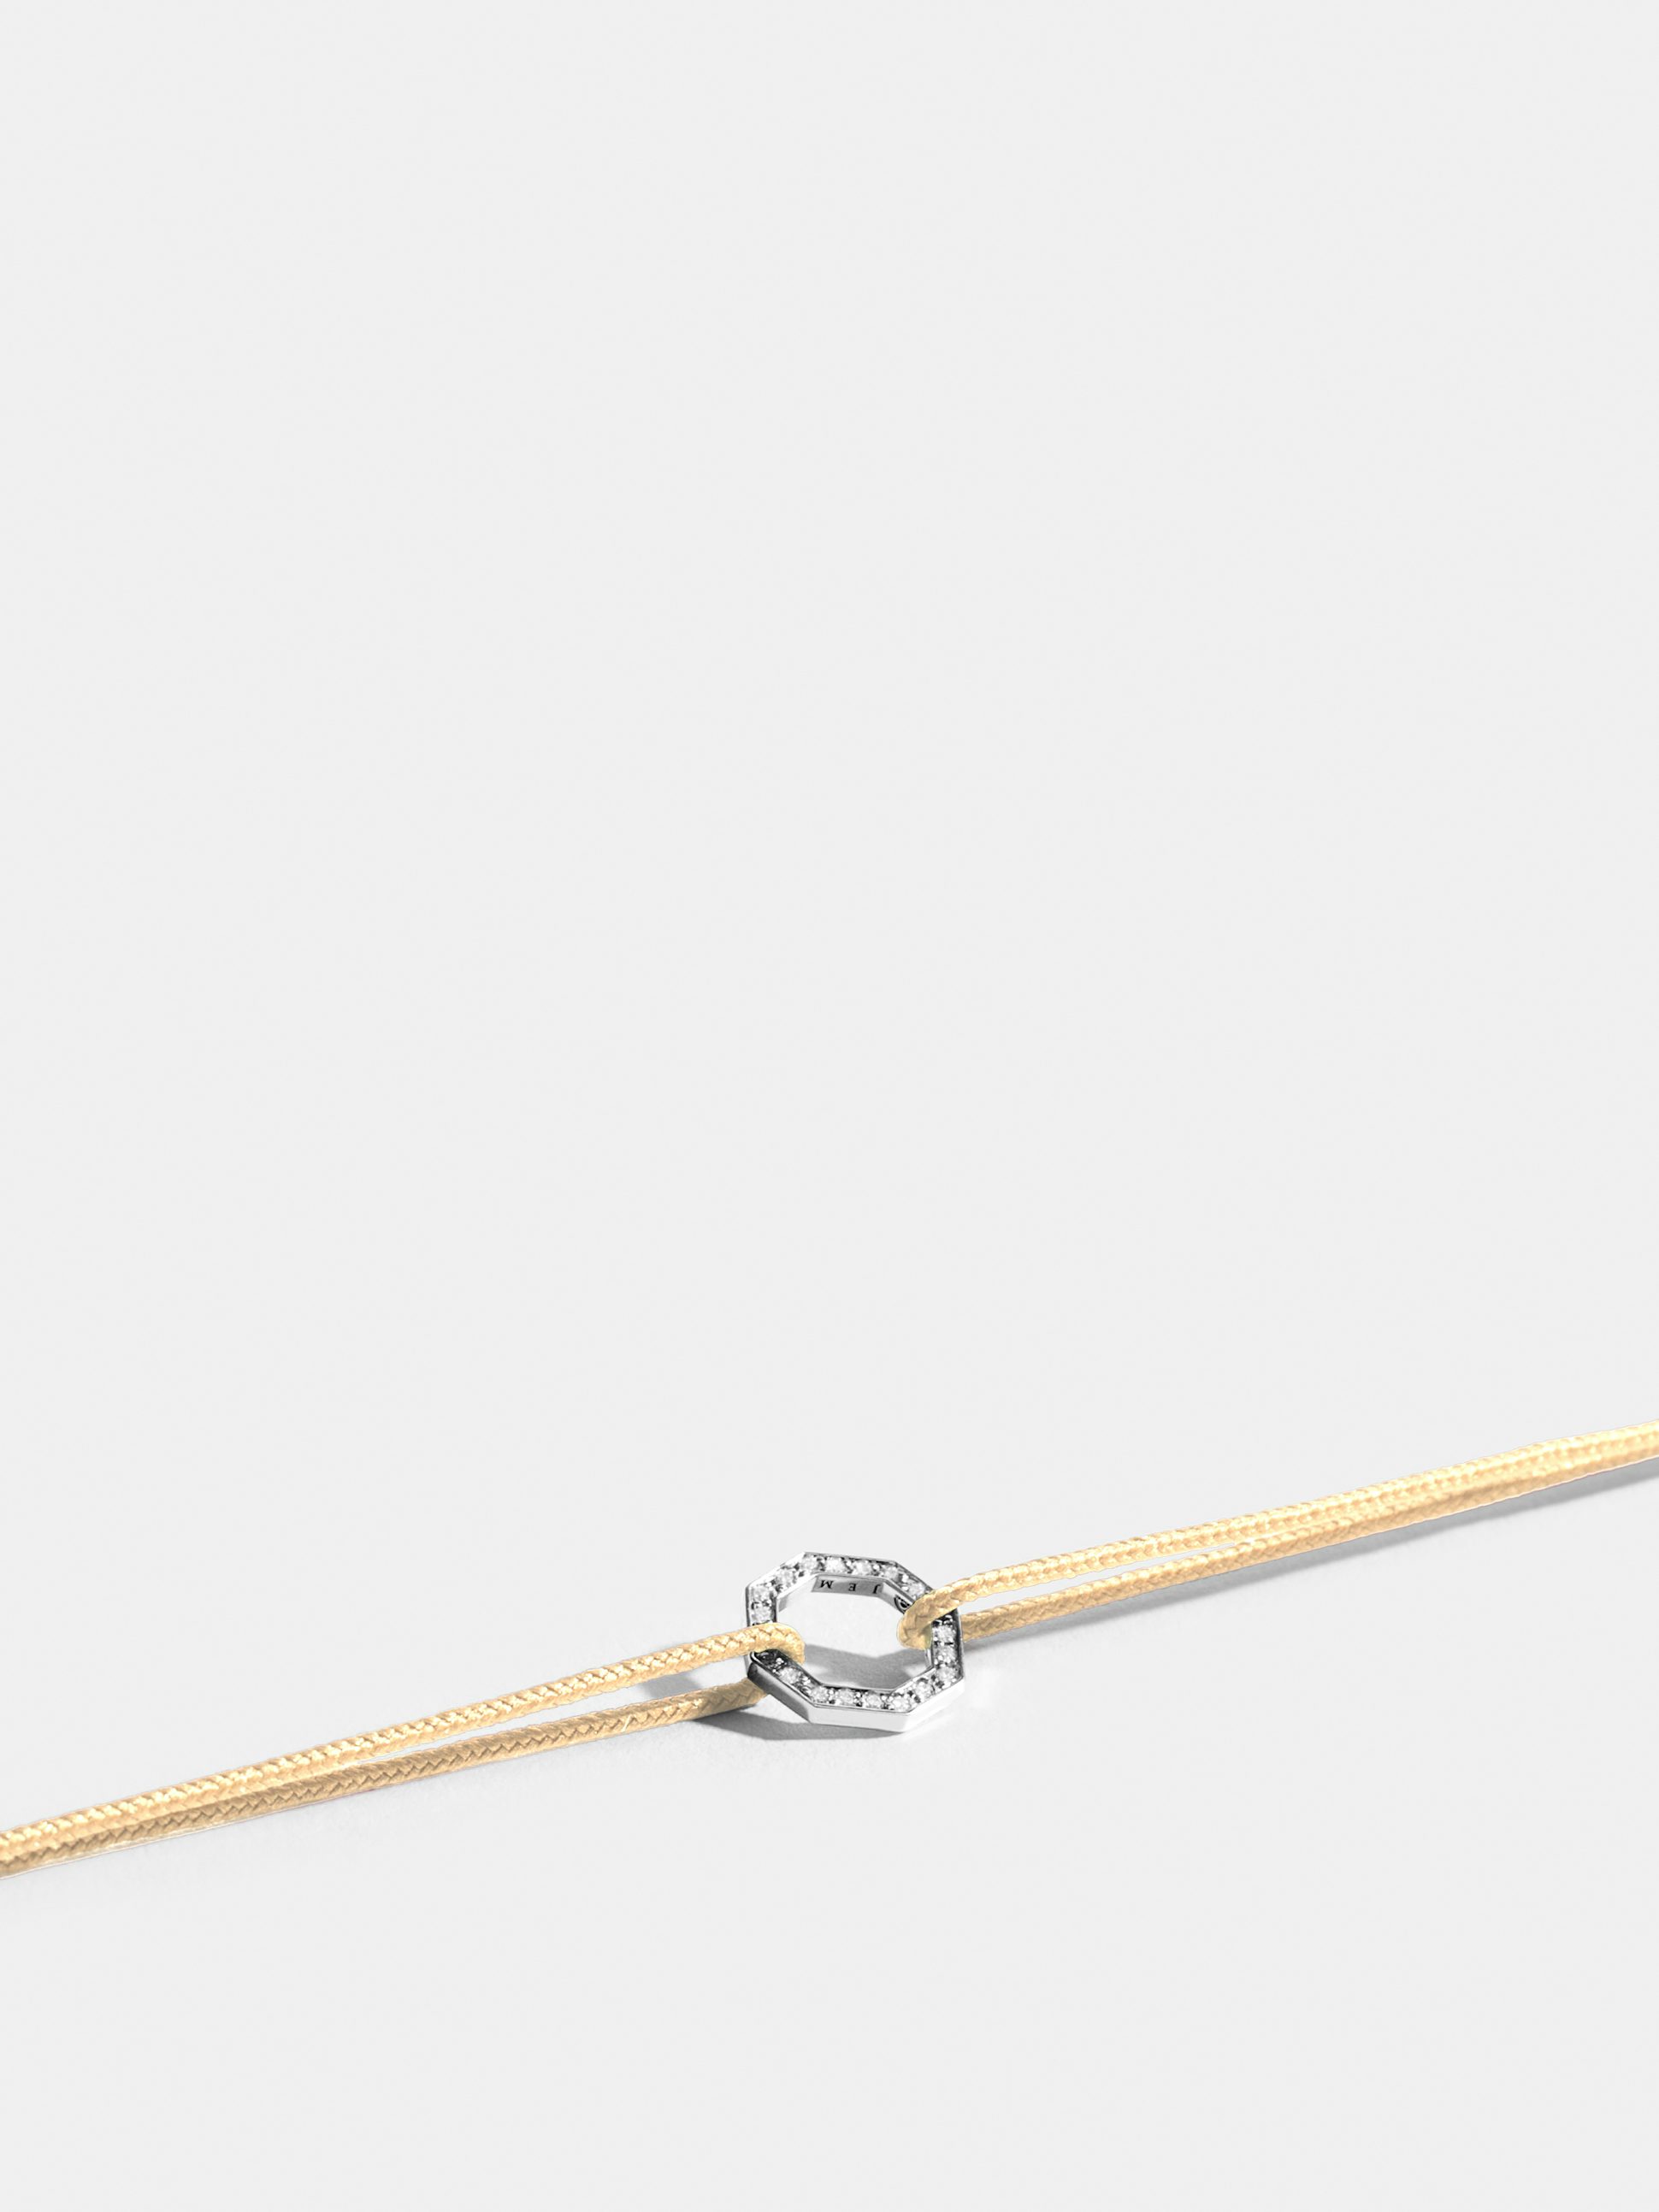 Octogone motif in 18k Fairmined ethical yellow gold, paved with lab-grown diamonds, on a ivory white cord.